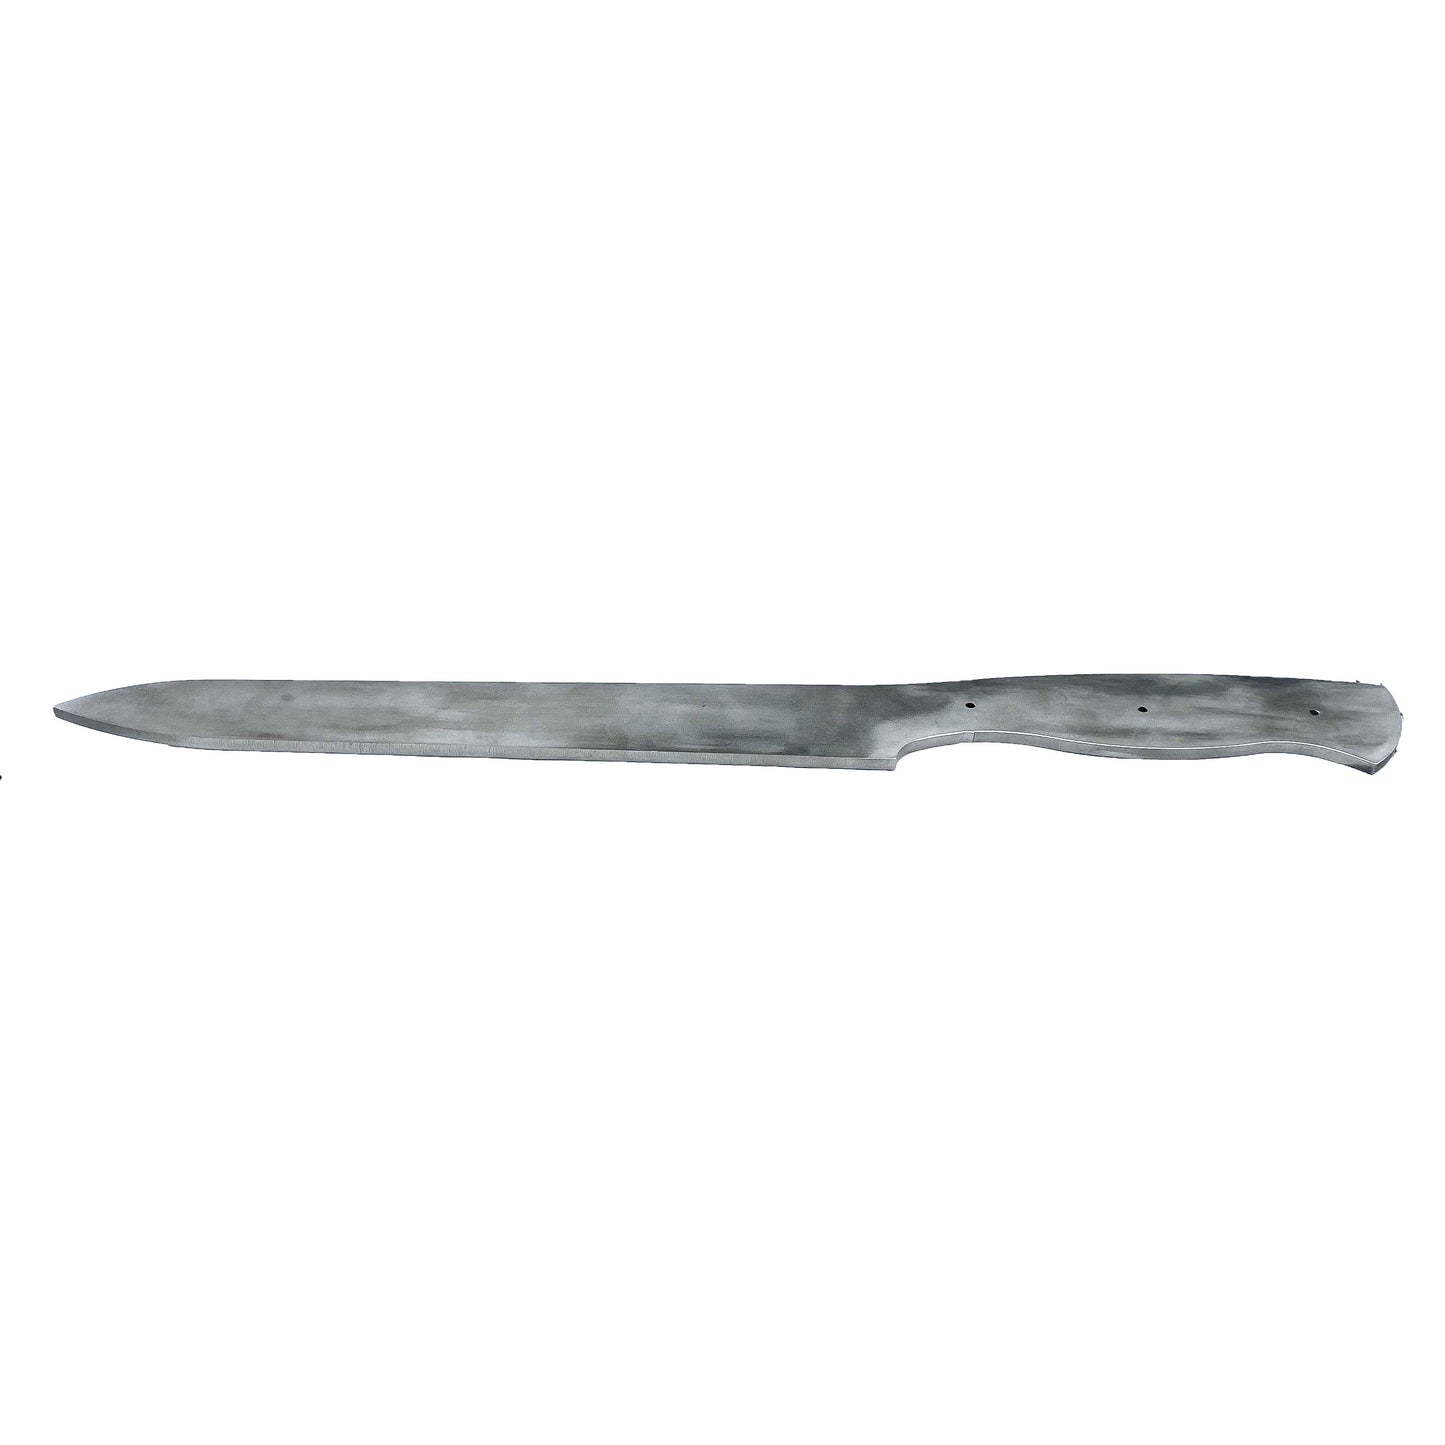 Deboning Chef Knife - High Carbon Stainless